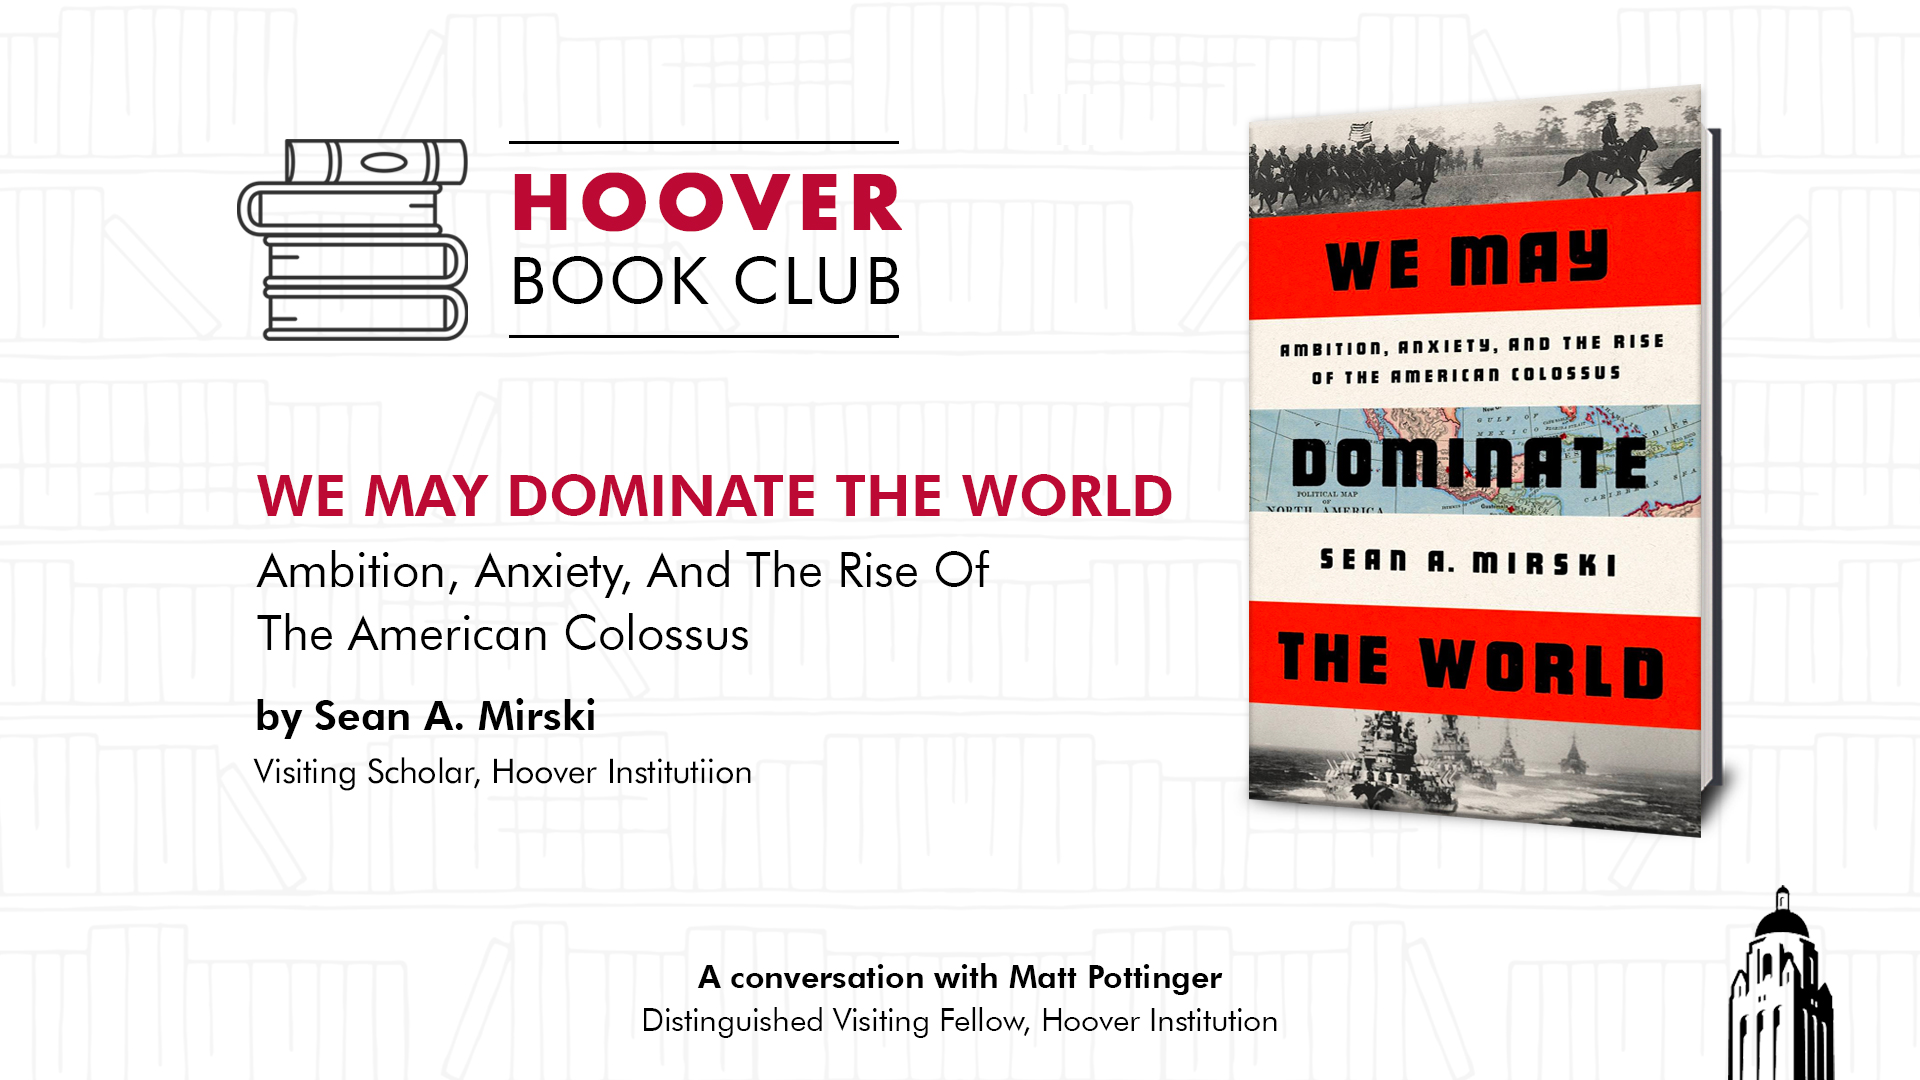 Hoover Book Club: We May Dominate The World: Ambition, Anxiety, And The Rise Of The American Colossus